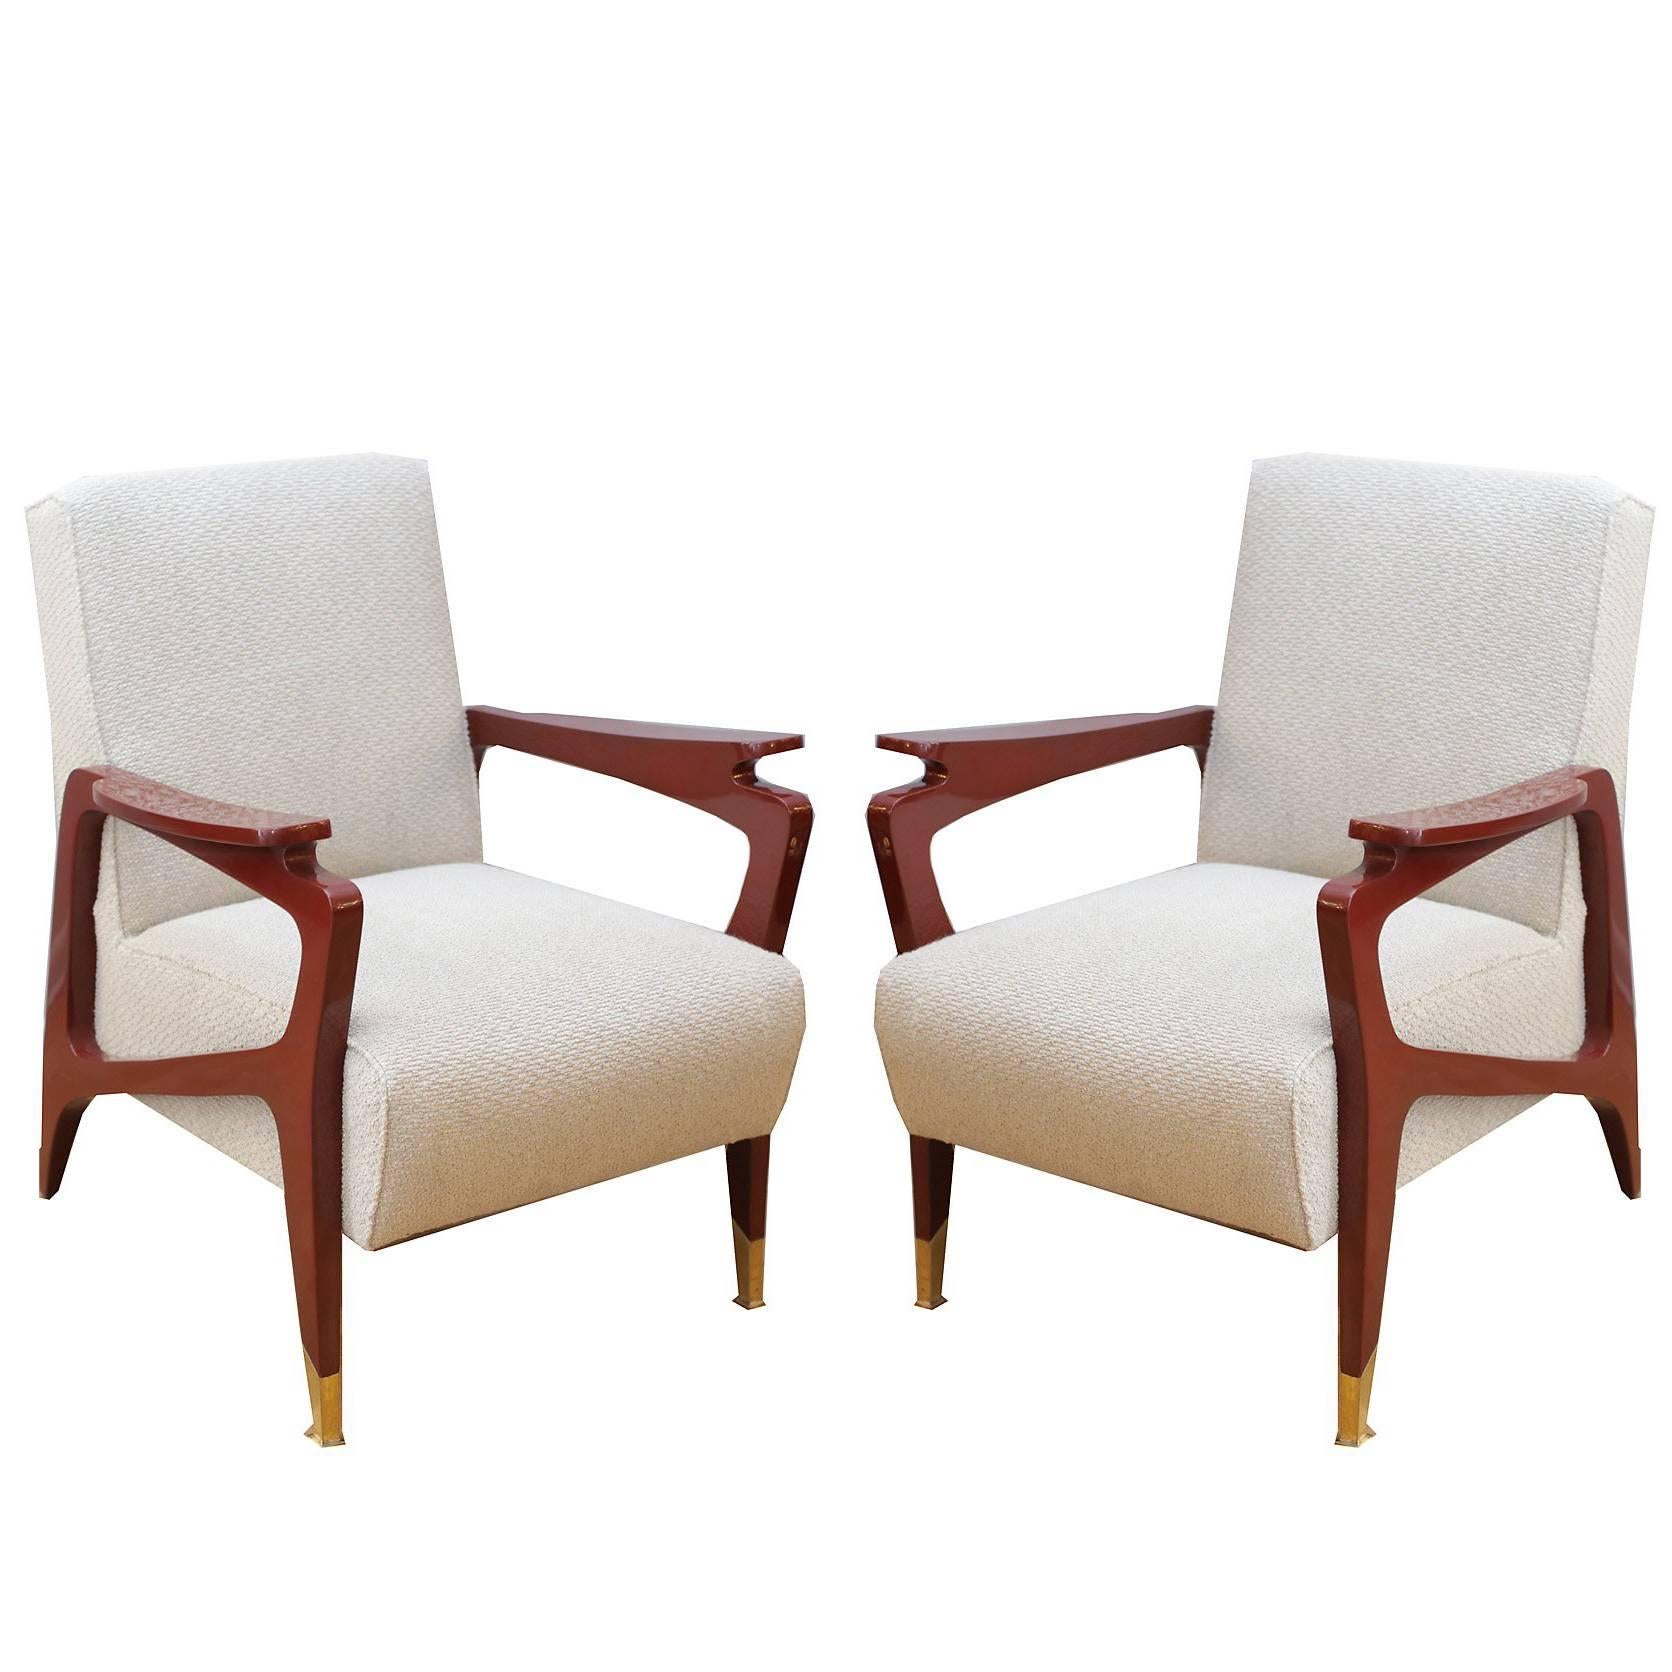 Pair of French Art Deco Armchairs, circa 1940s For Sale